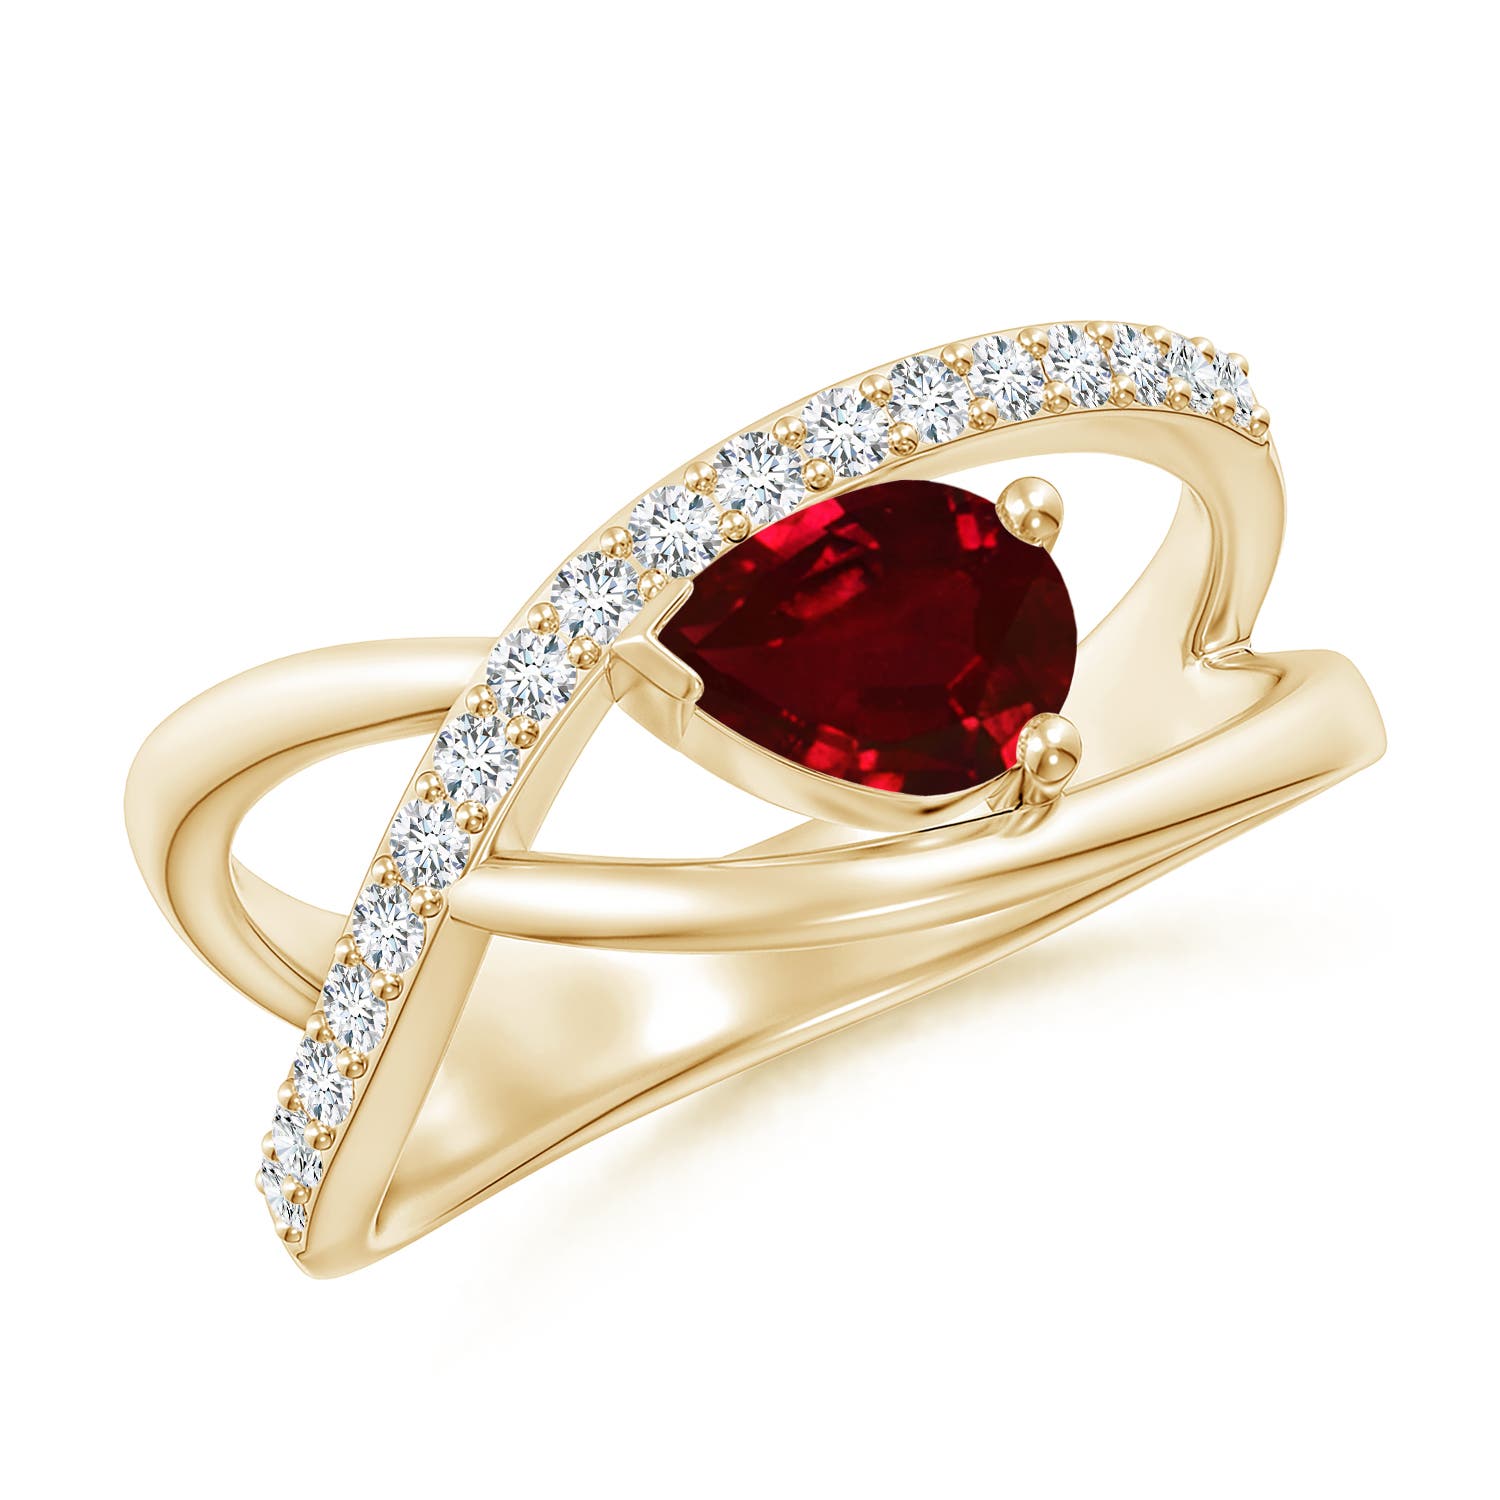 The 8 Best Reasons To Buy A Handmade Ruby Ring - From Comfort to Style –  Shiraz Jewelry